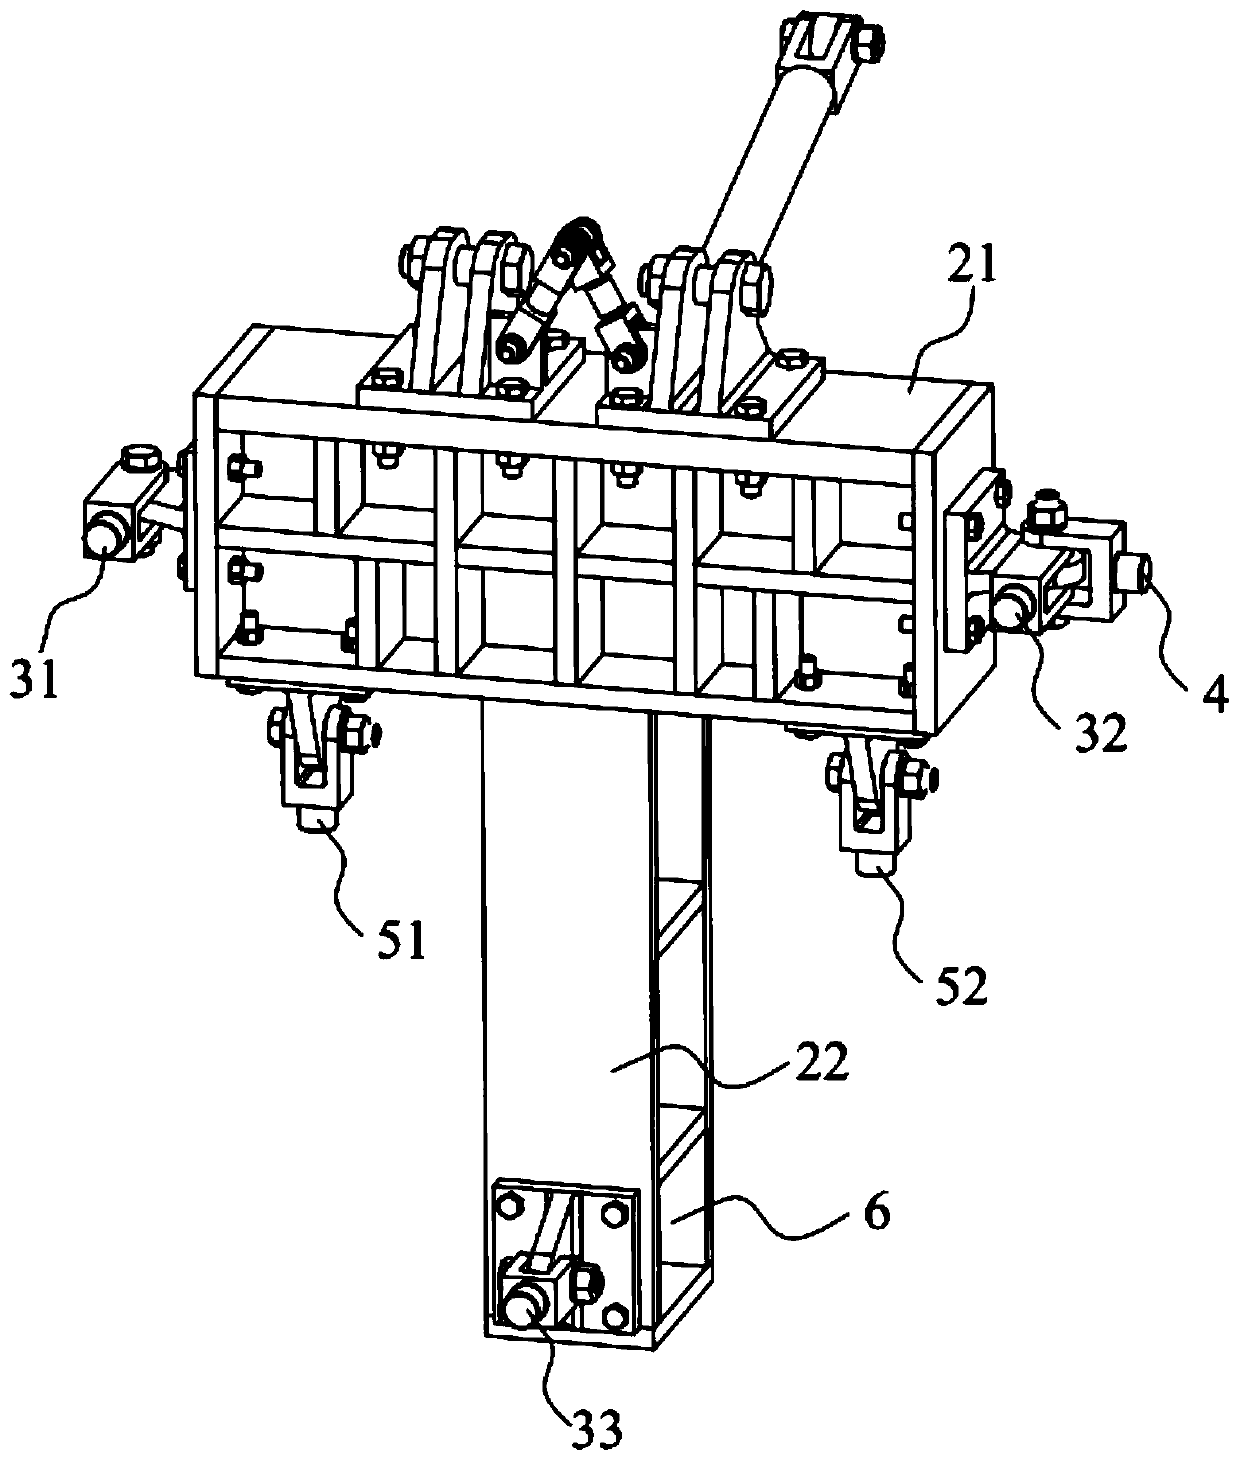 Loading device of wing hanging connector